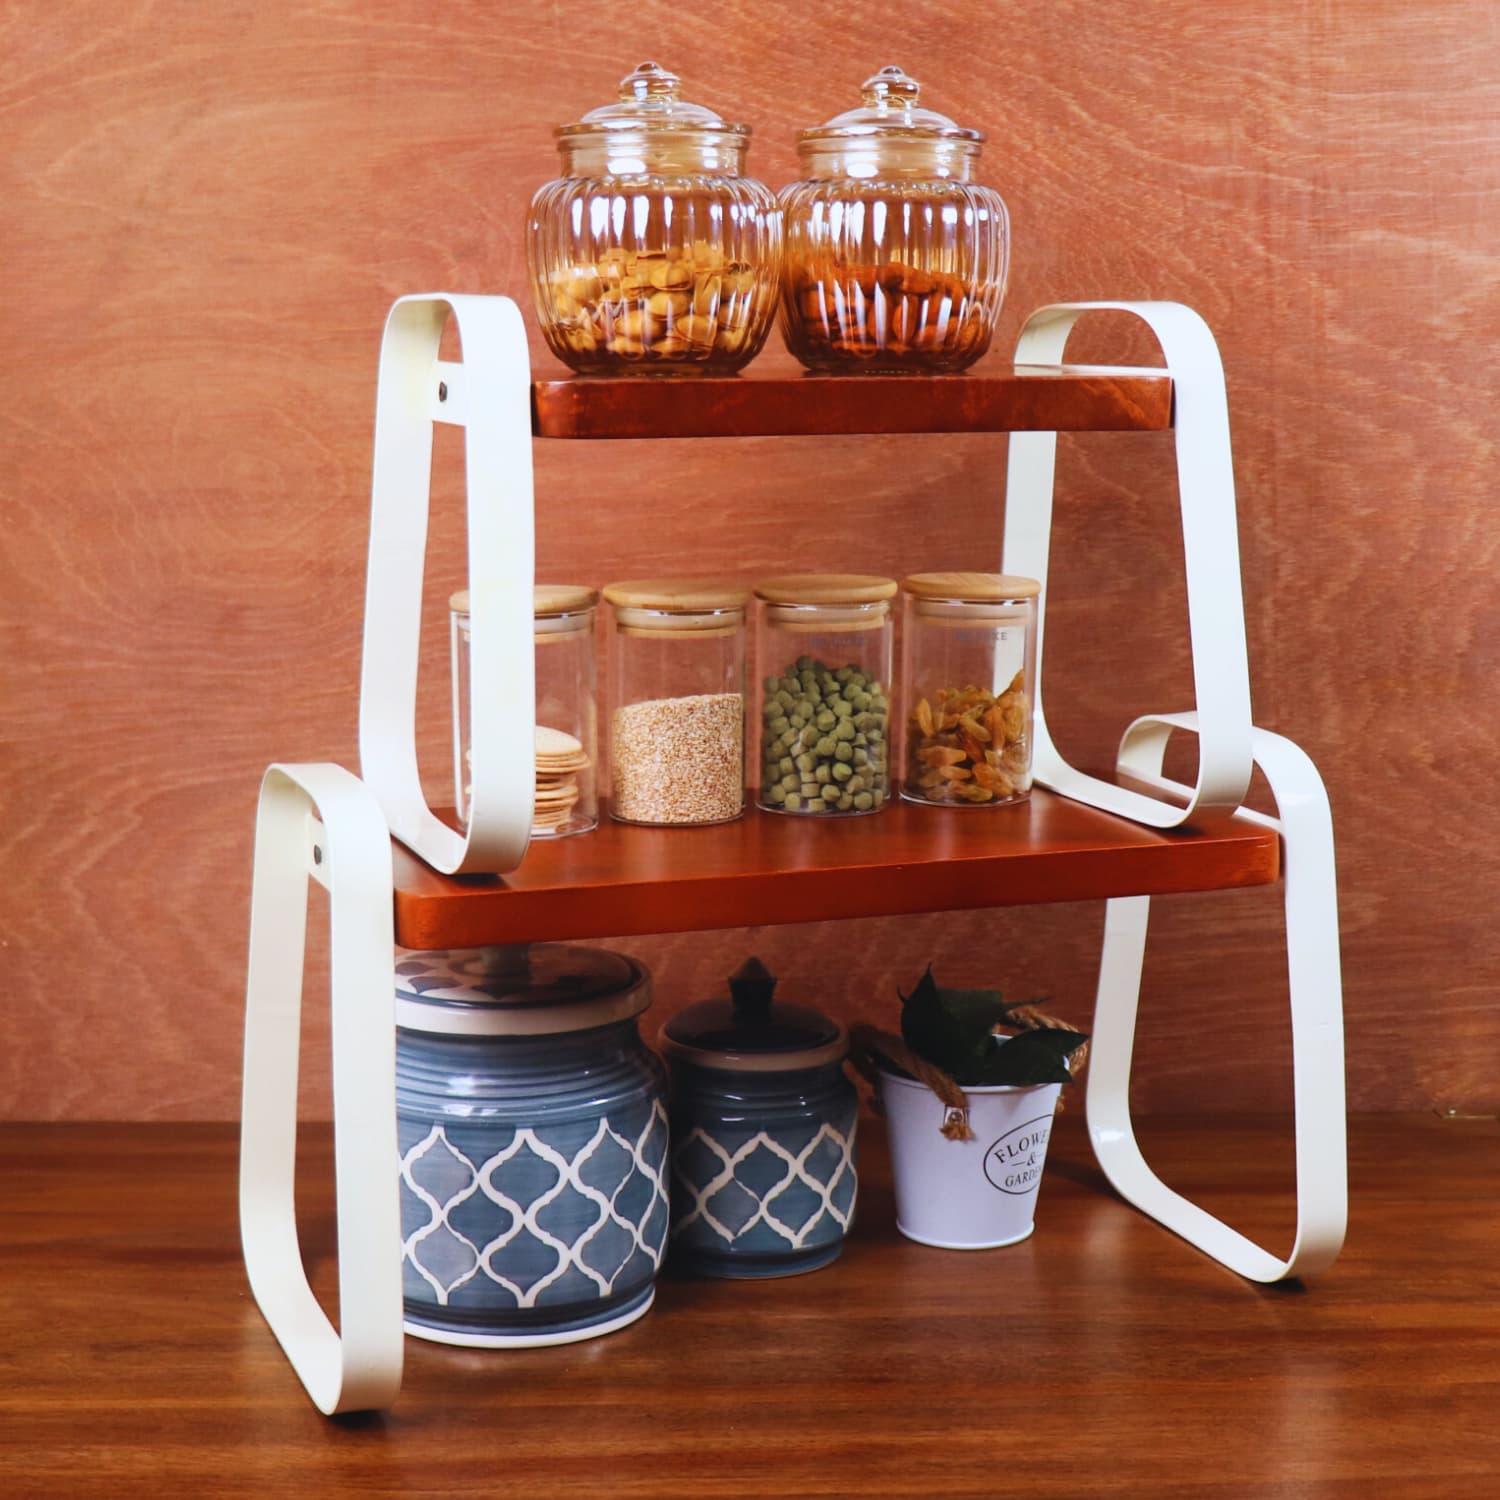 The Stackable wooden  kitchen Organizer set of 2